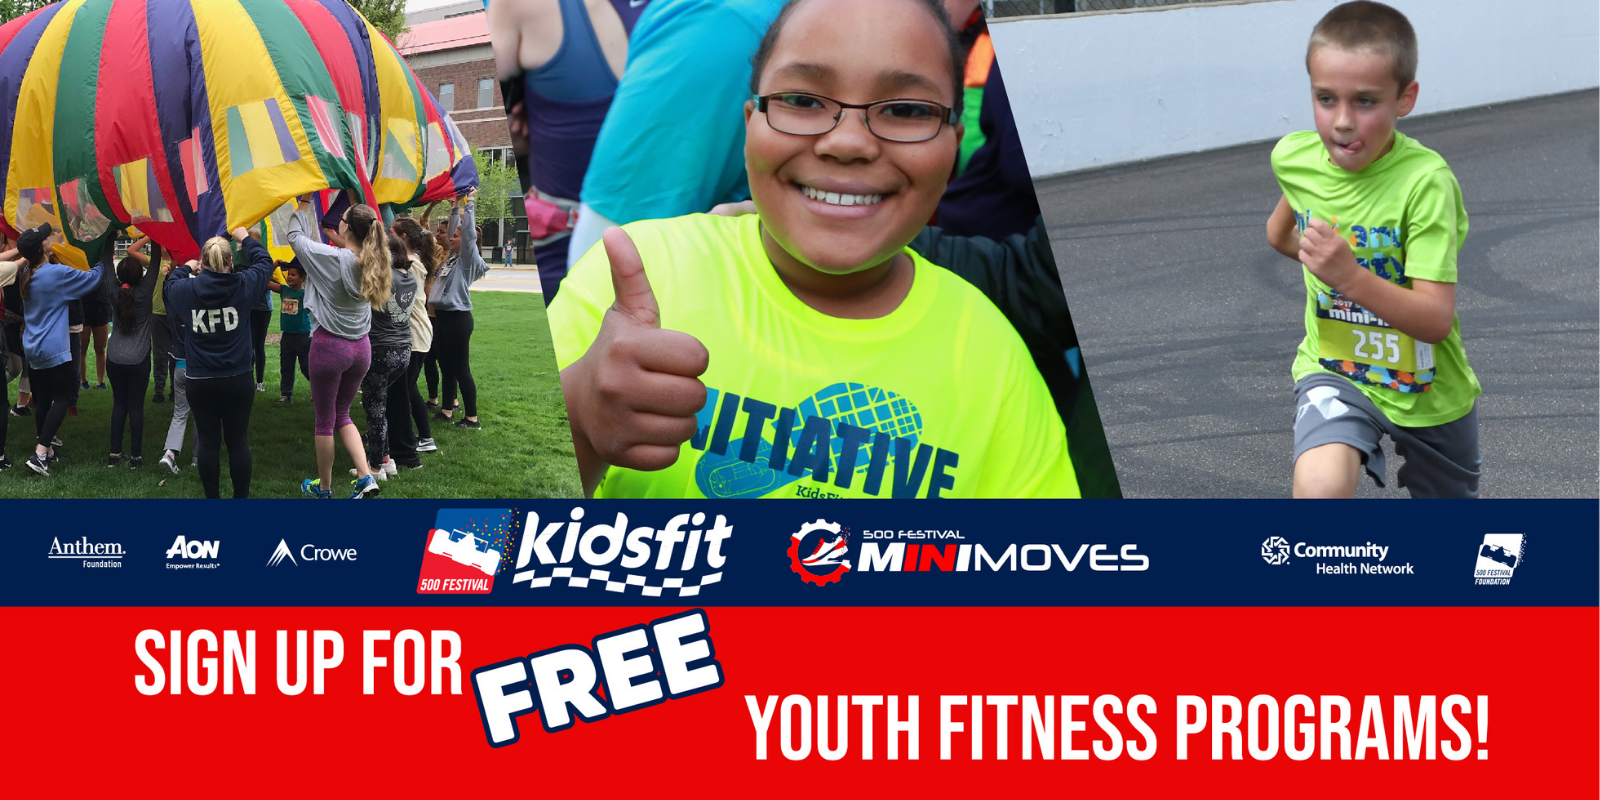 500 Festival’s FREE Youth Physical Fitness Programs